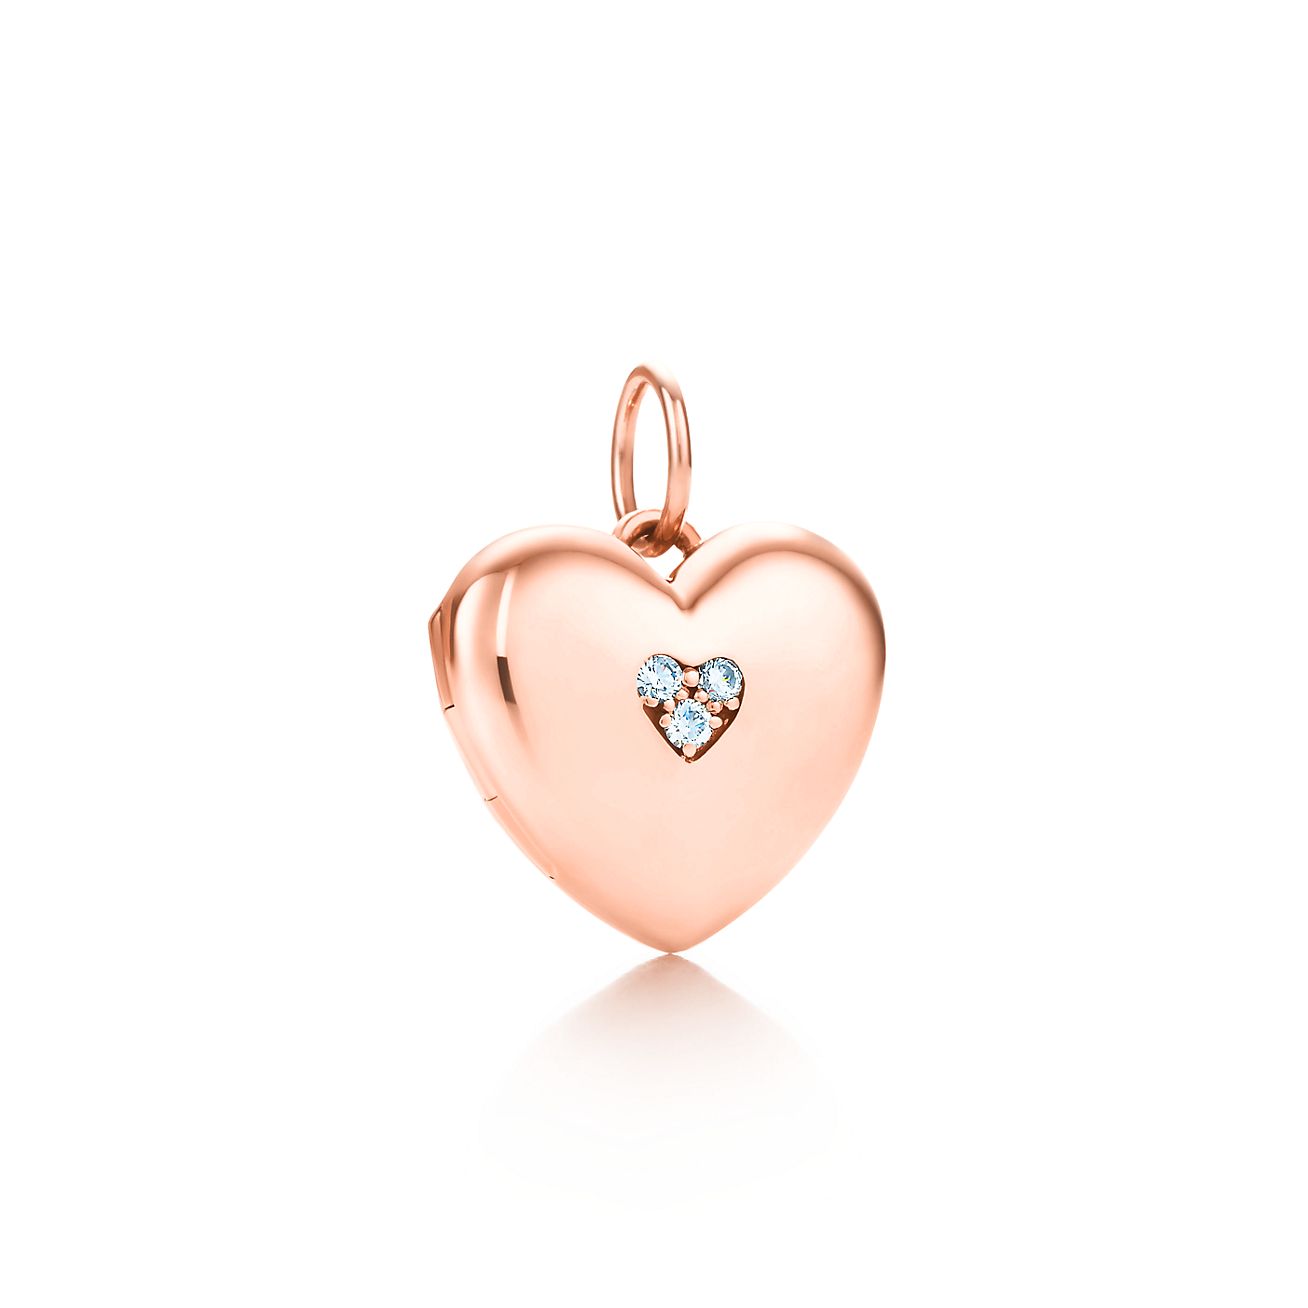 Heart locket in 18k rose gold with 